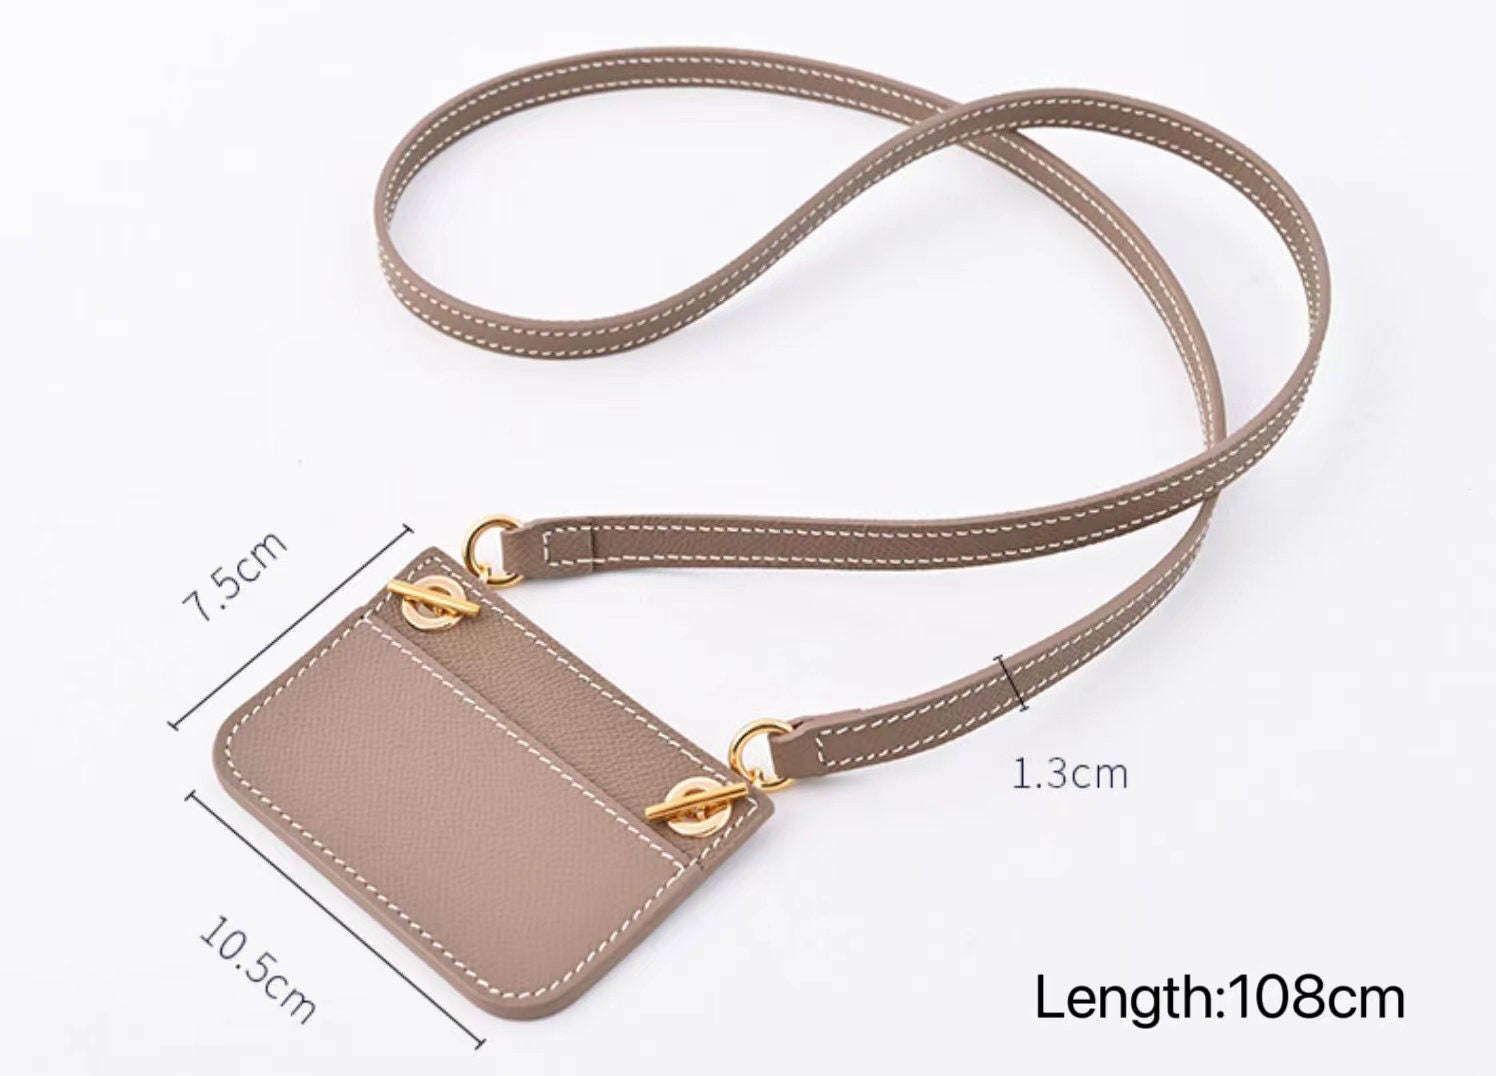 Constance Slim Wallet Strap Insert Constance Conversion Kit with Gold Chain  Constance Slim Wallet Insert Wallet on Chain (Beige, 120cm Silver Chain)